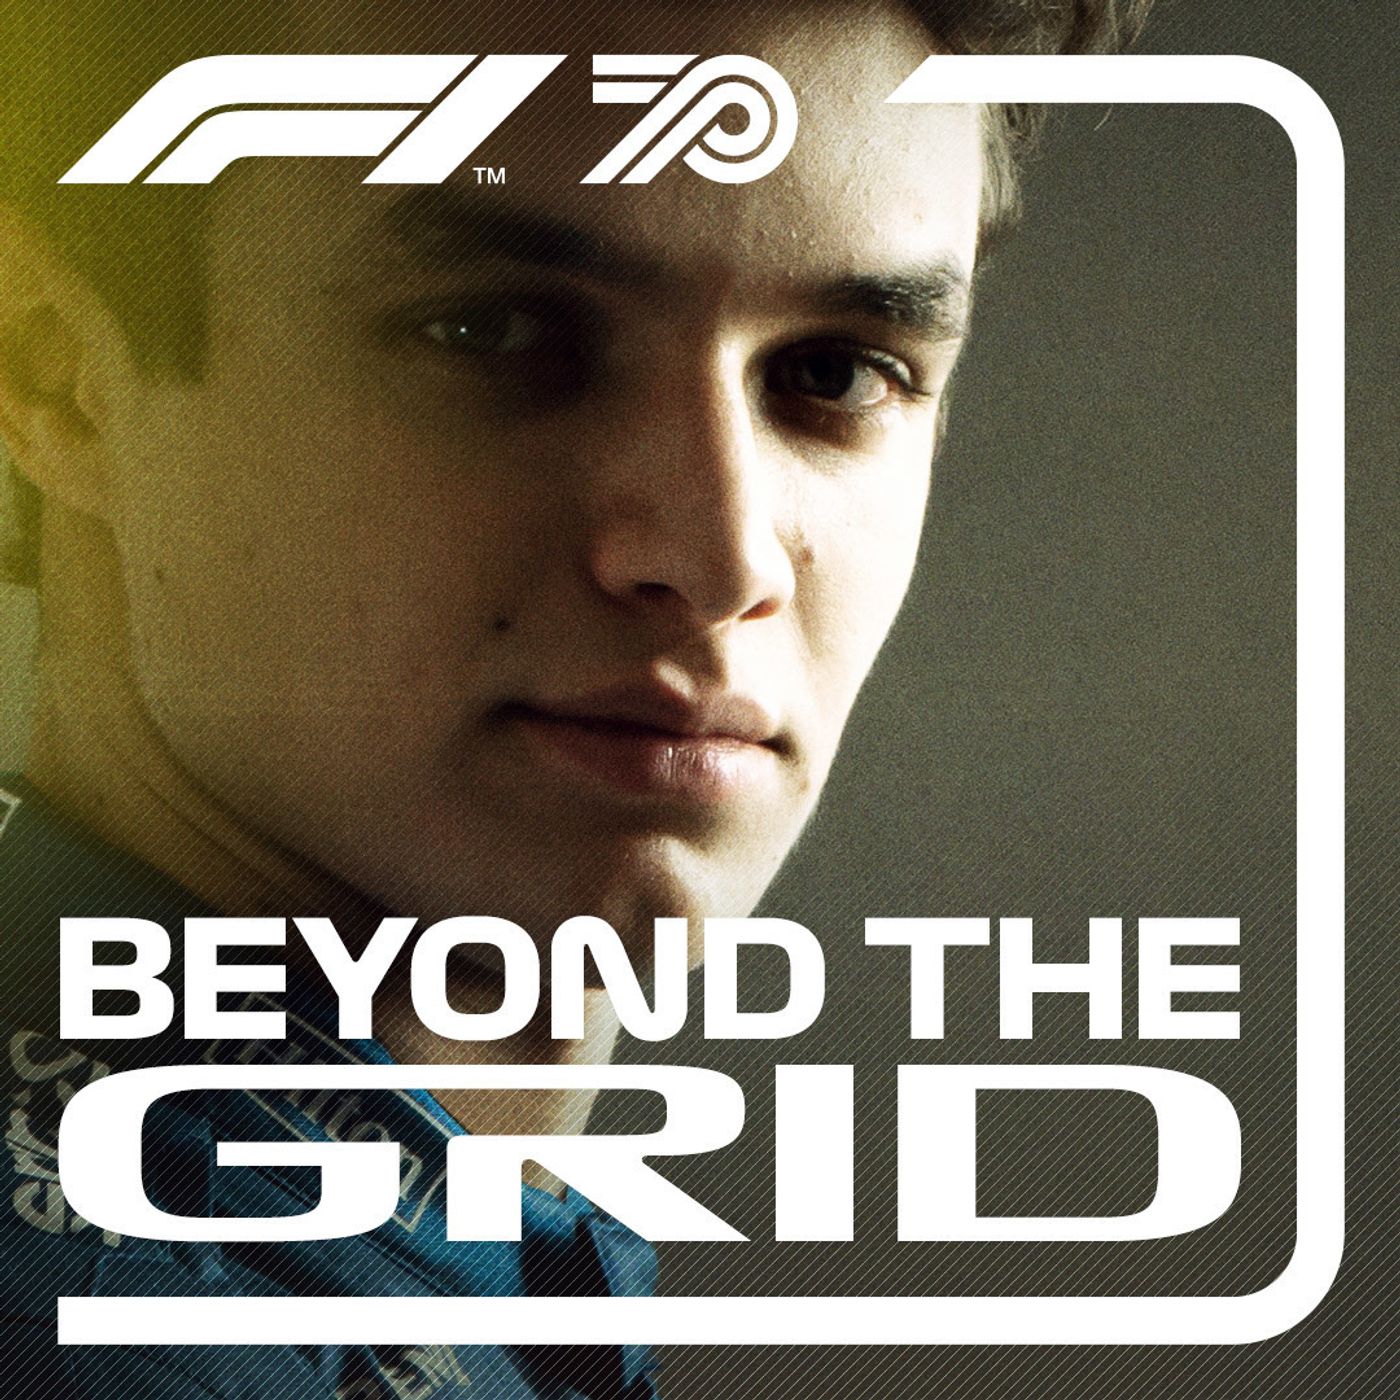 Lando Norris on late nights, trolls and his pre-F1 meeting with Helmut Marko